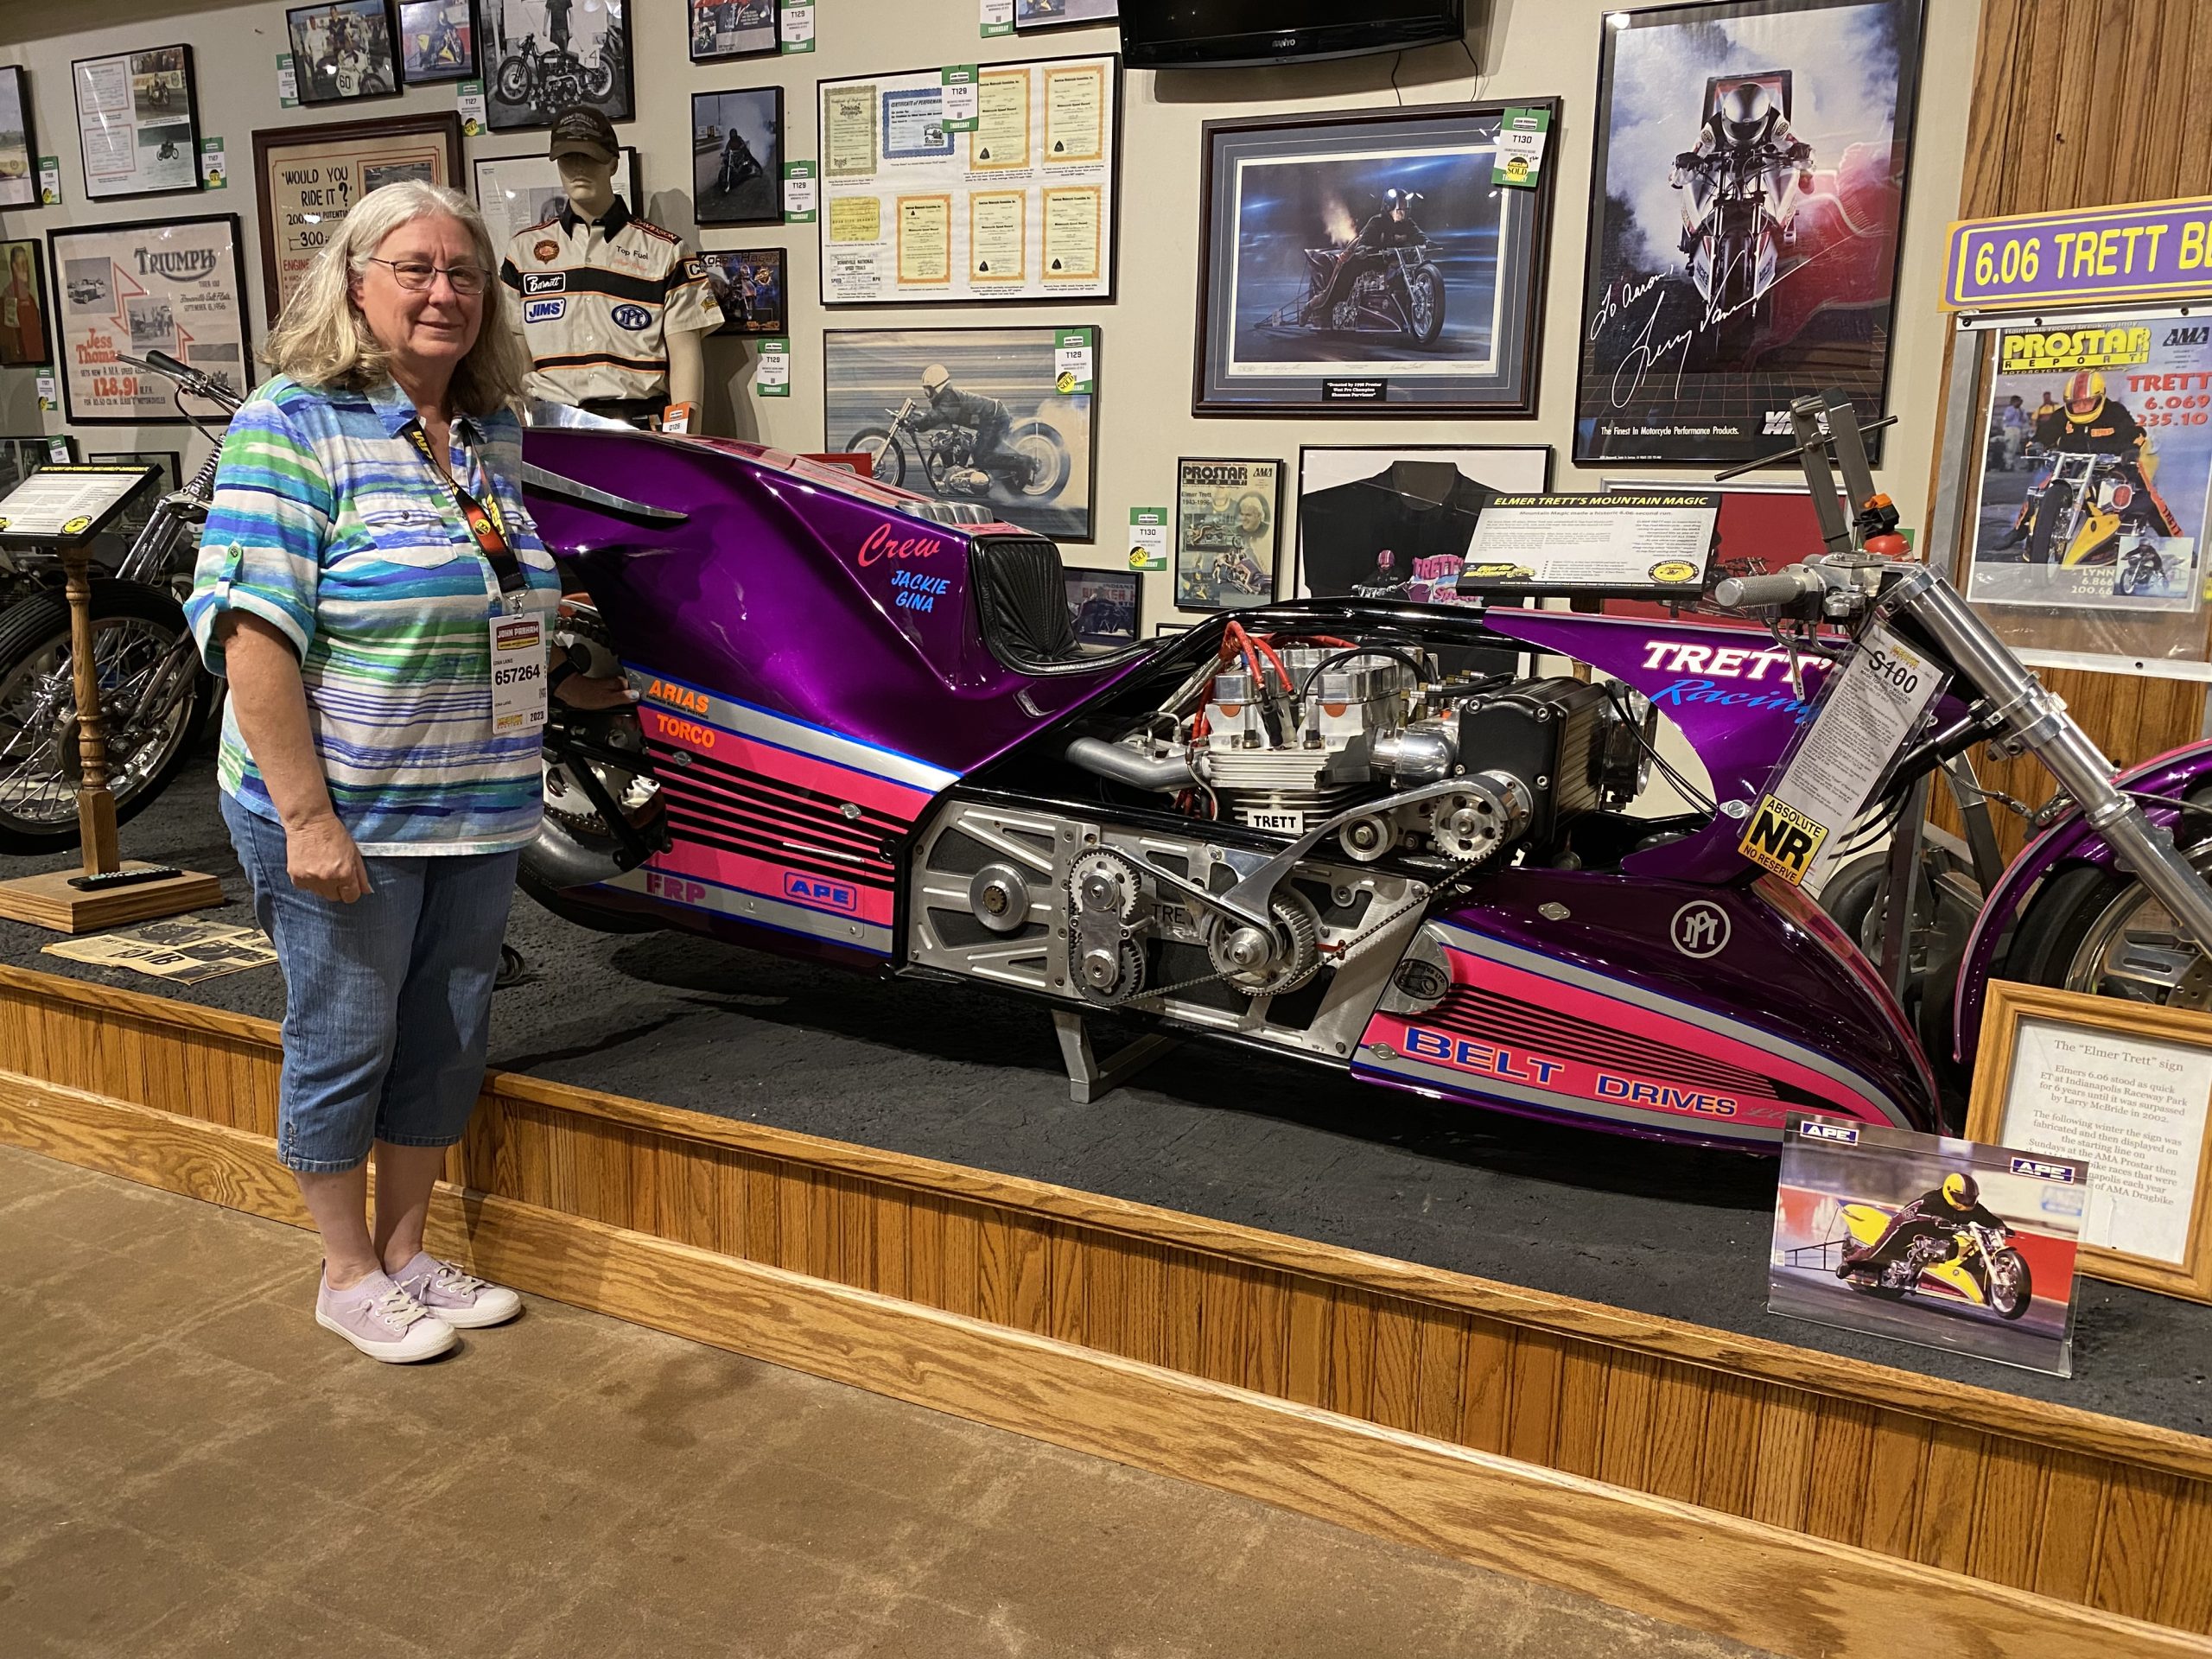 Gina Trett next to her father's motorcycle